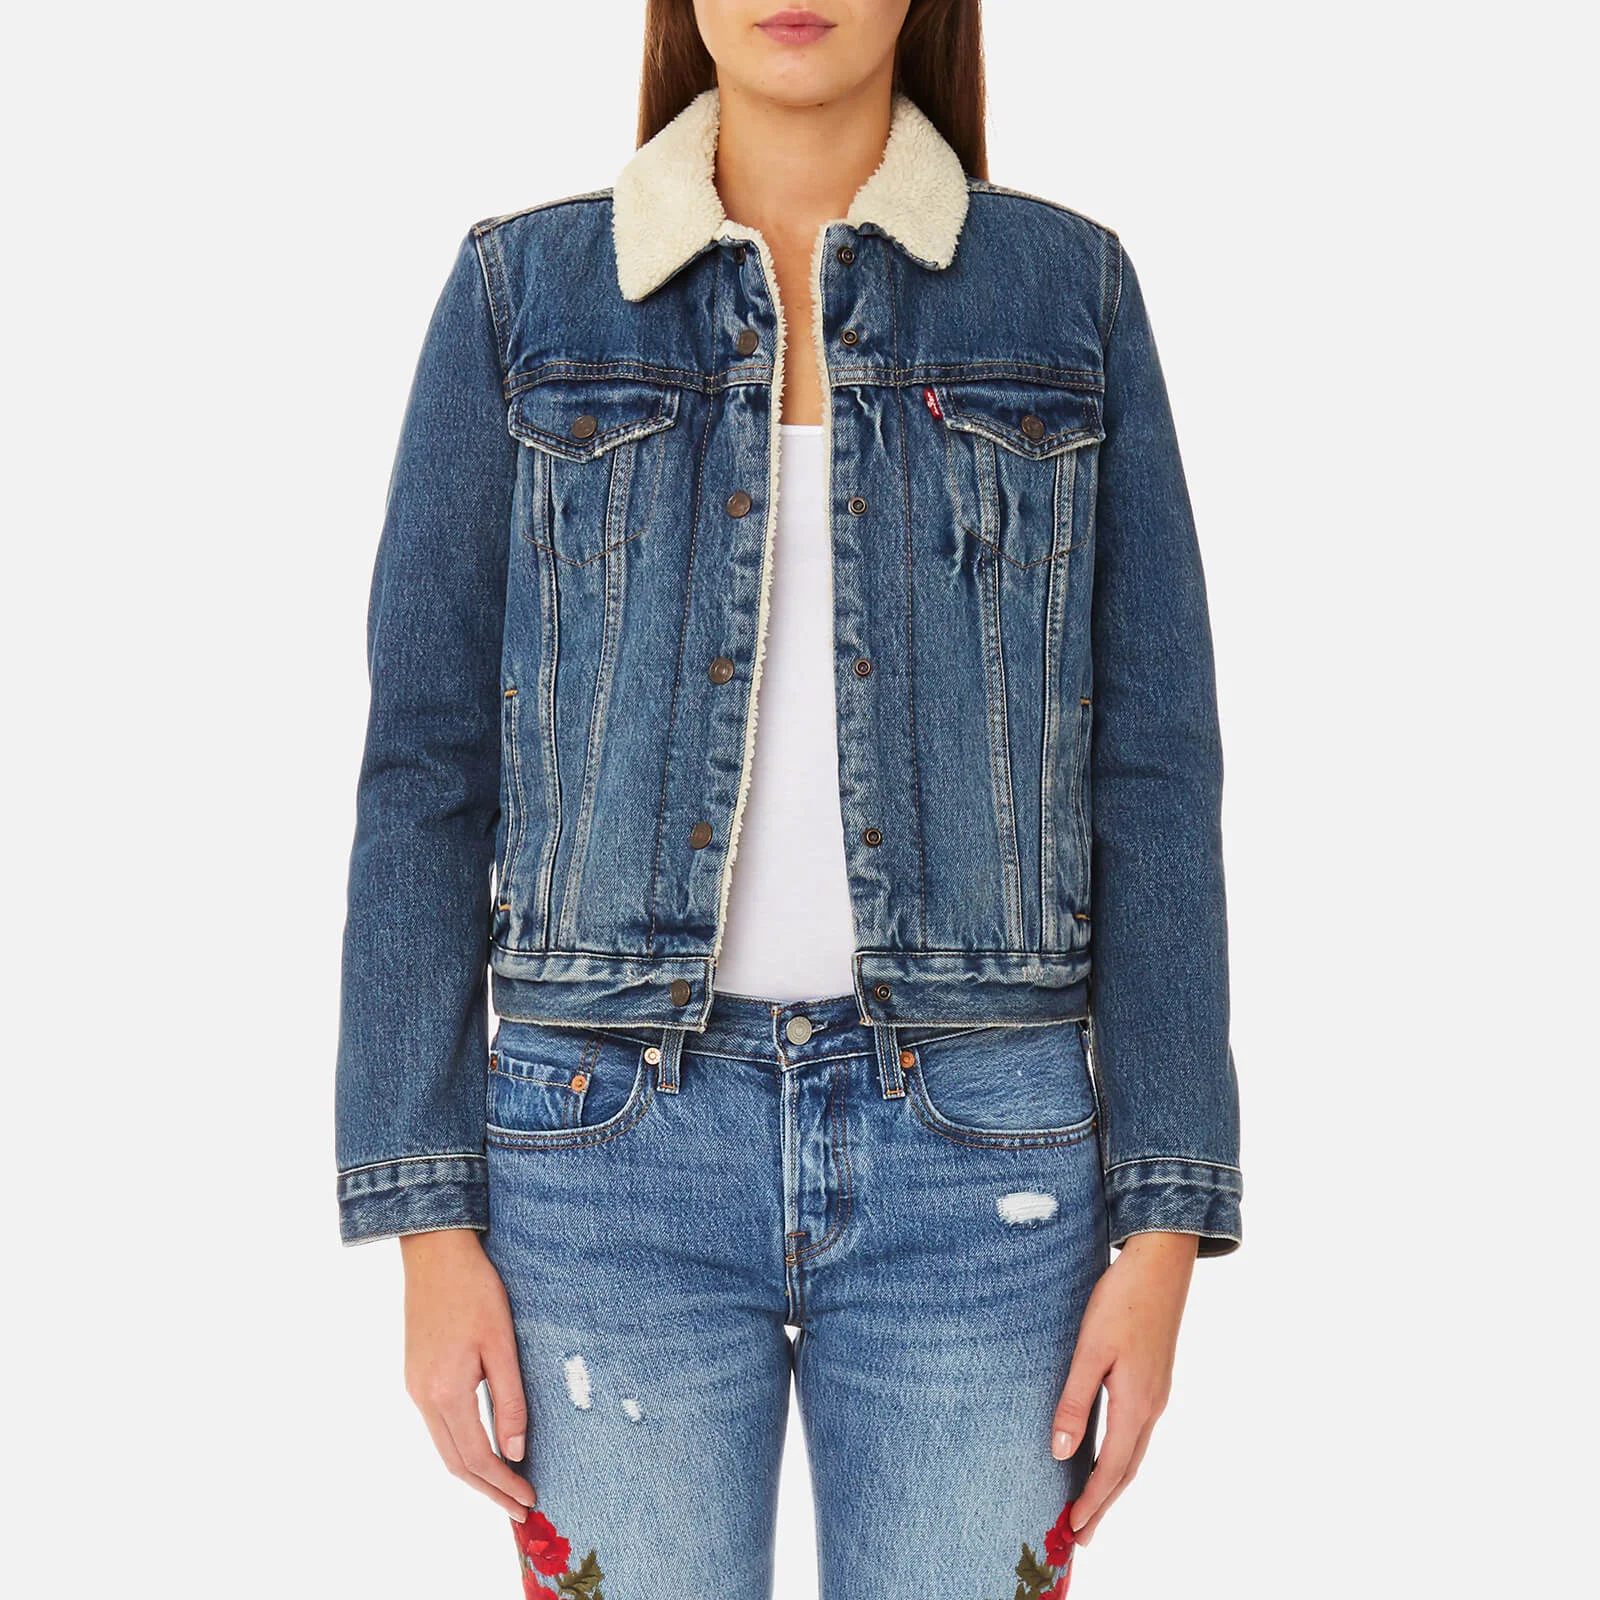 Levi's Women's Original Sherpa Trucker Jacket - Extremely Loveable Image 1